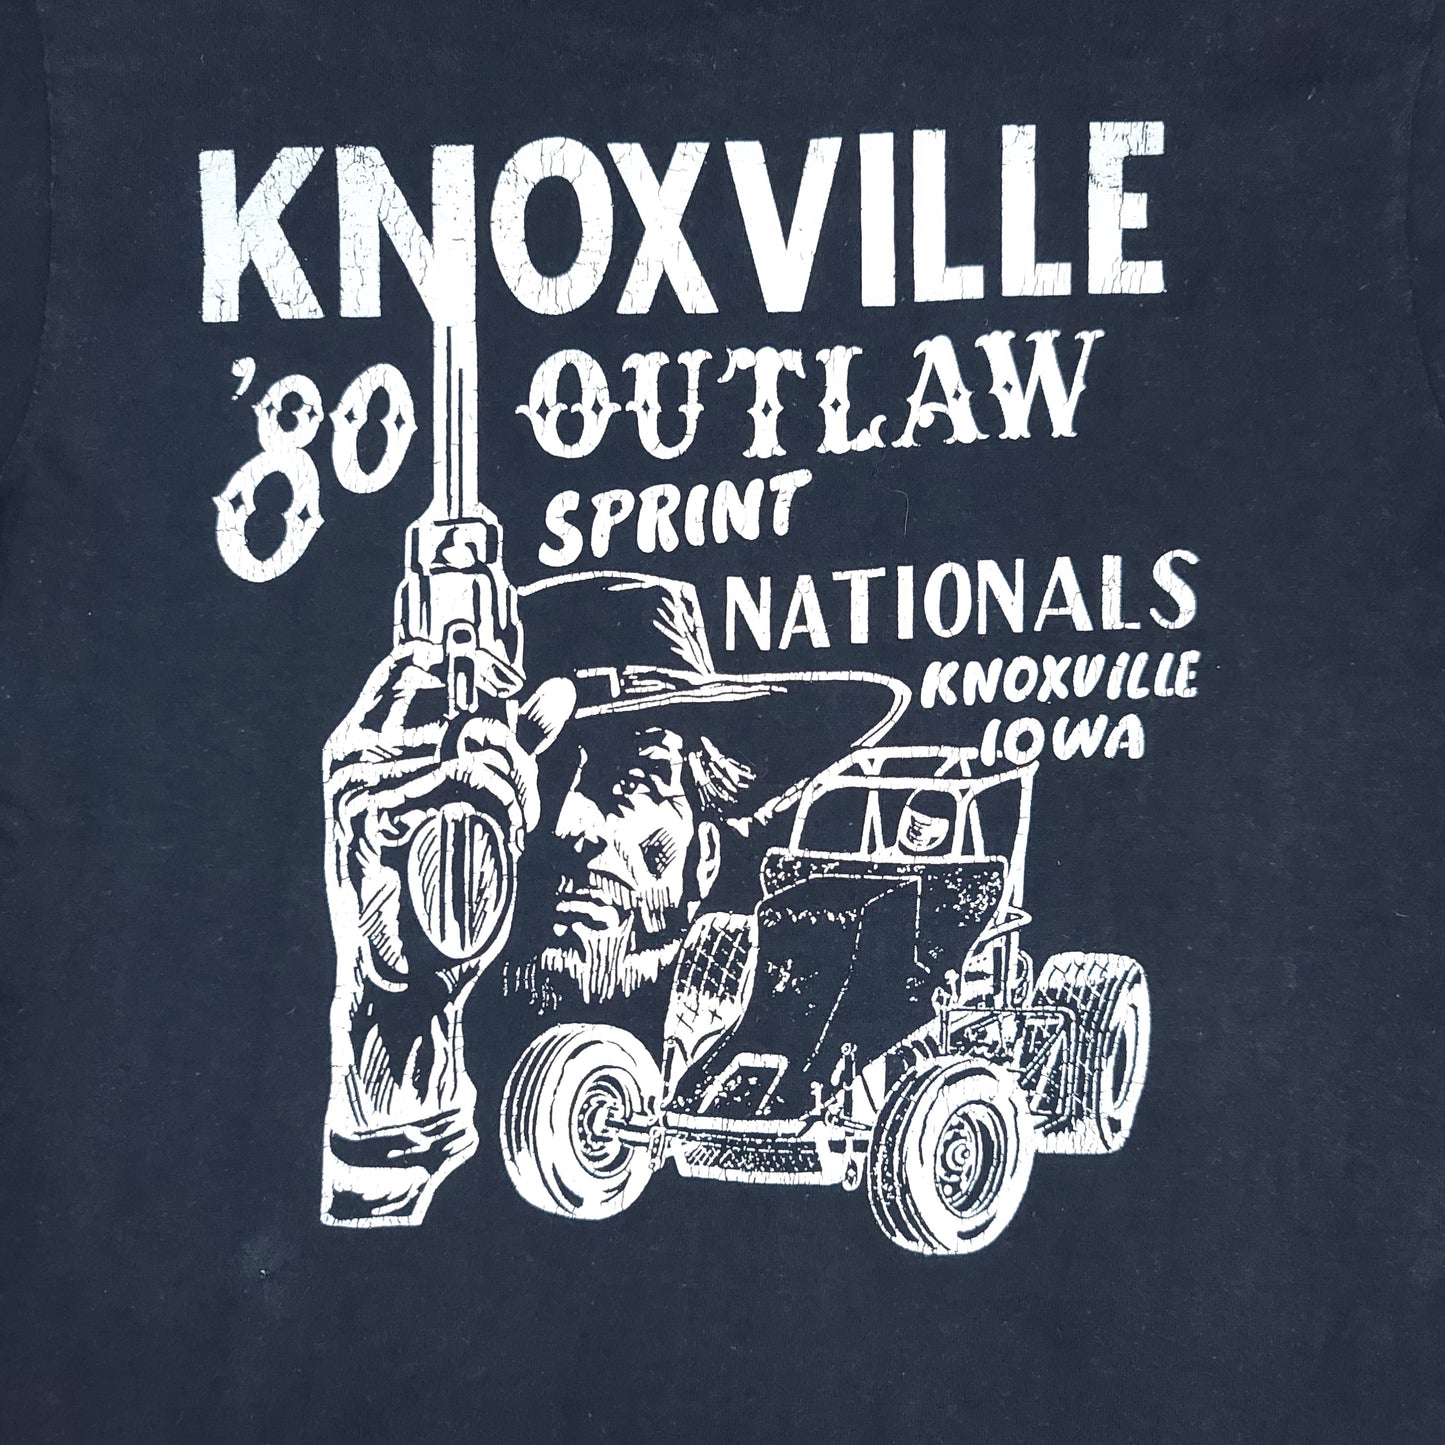 Vintage 1980 Knoxville Outlaw Sprint Nationals Tee